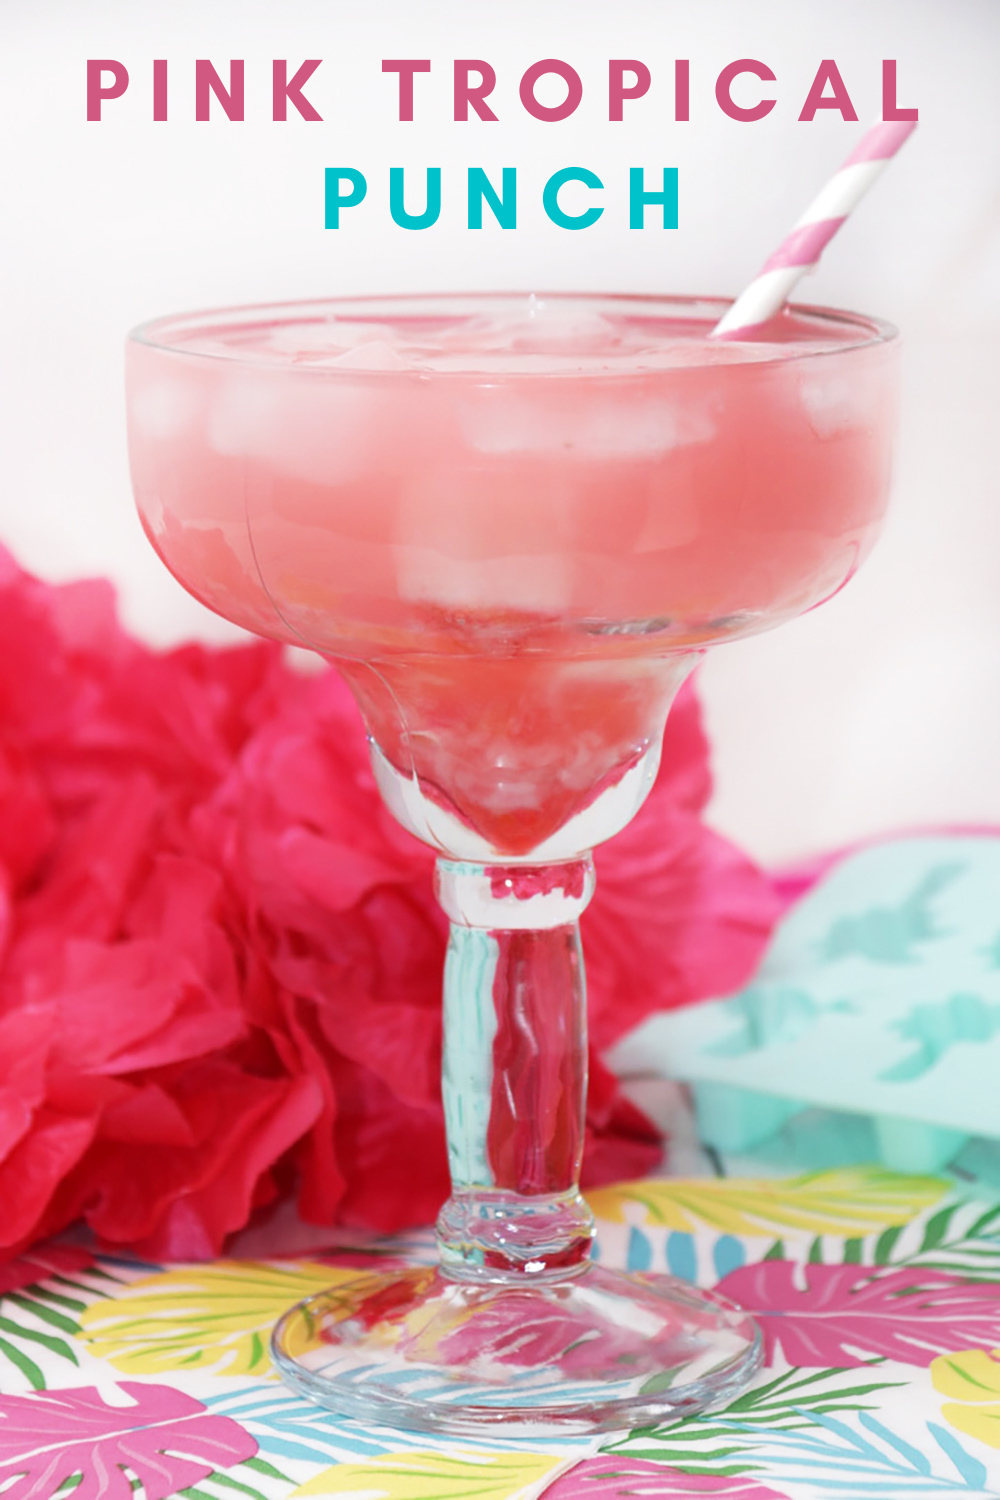 Pink Tropical Punch Drink non-alcoholic